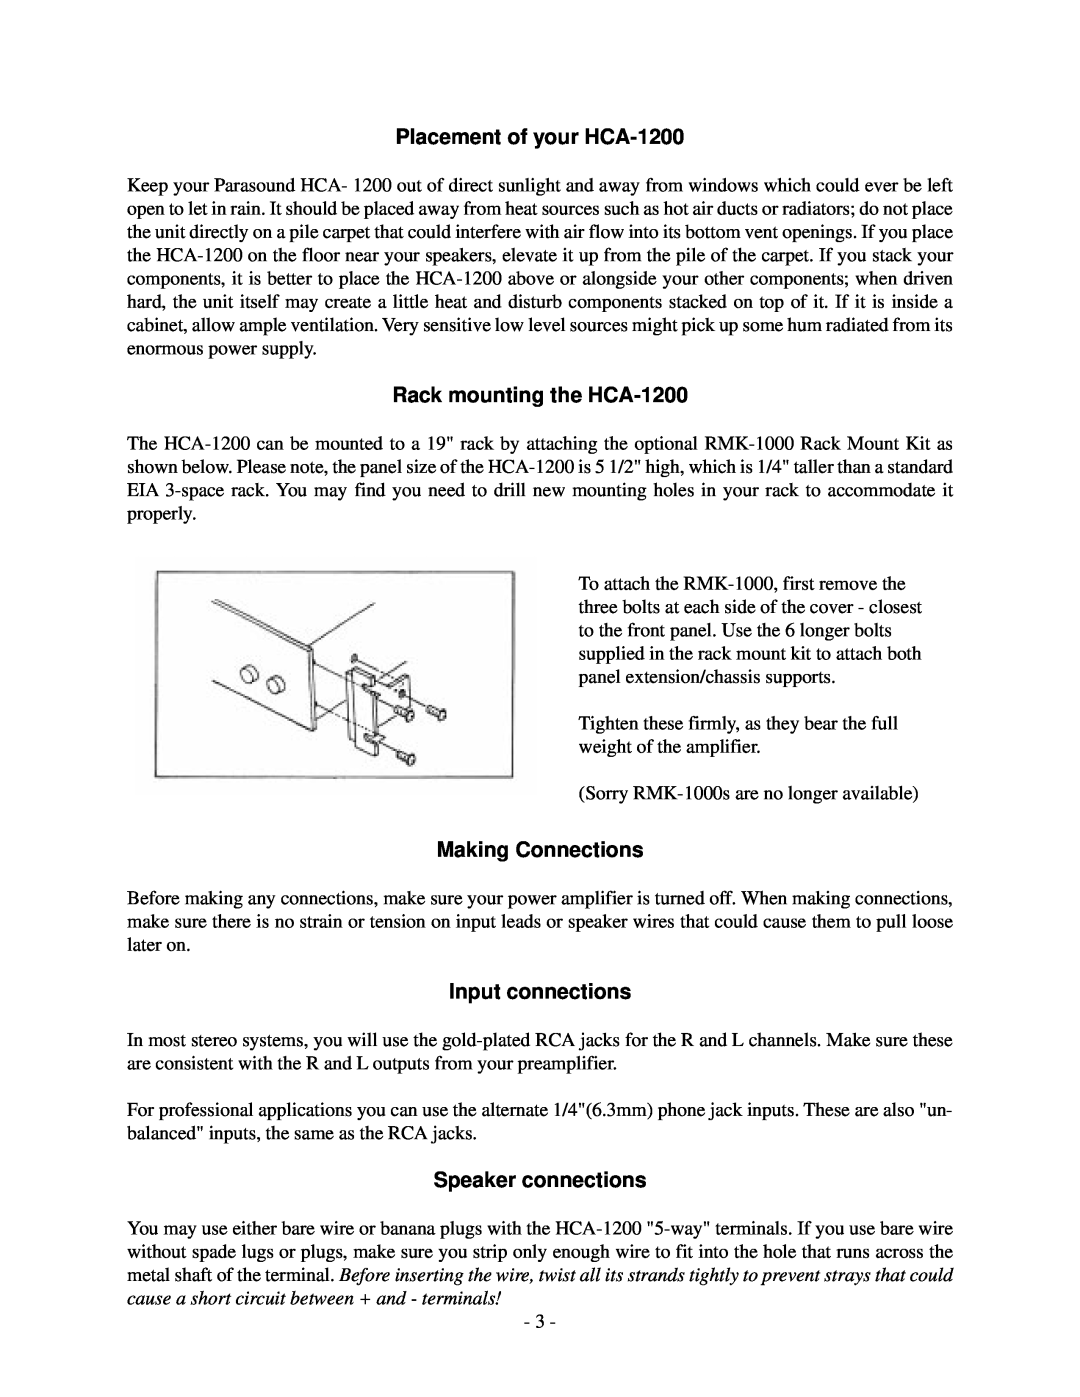 Parasound owner manual Placement of your HCA-1200, Rack mounting the HCA-1200, Making Connections, Input connections 